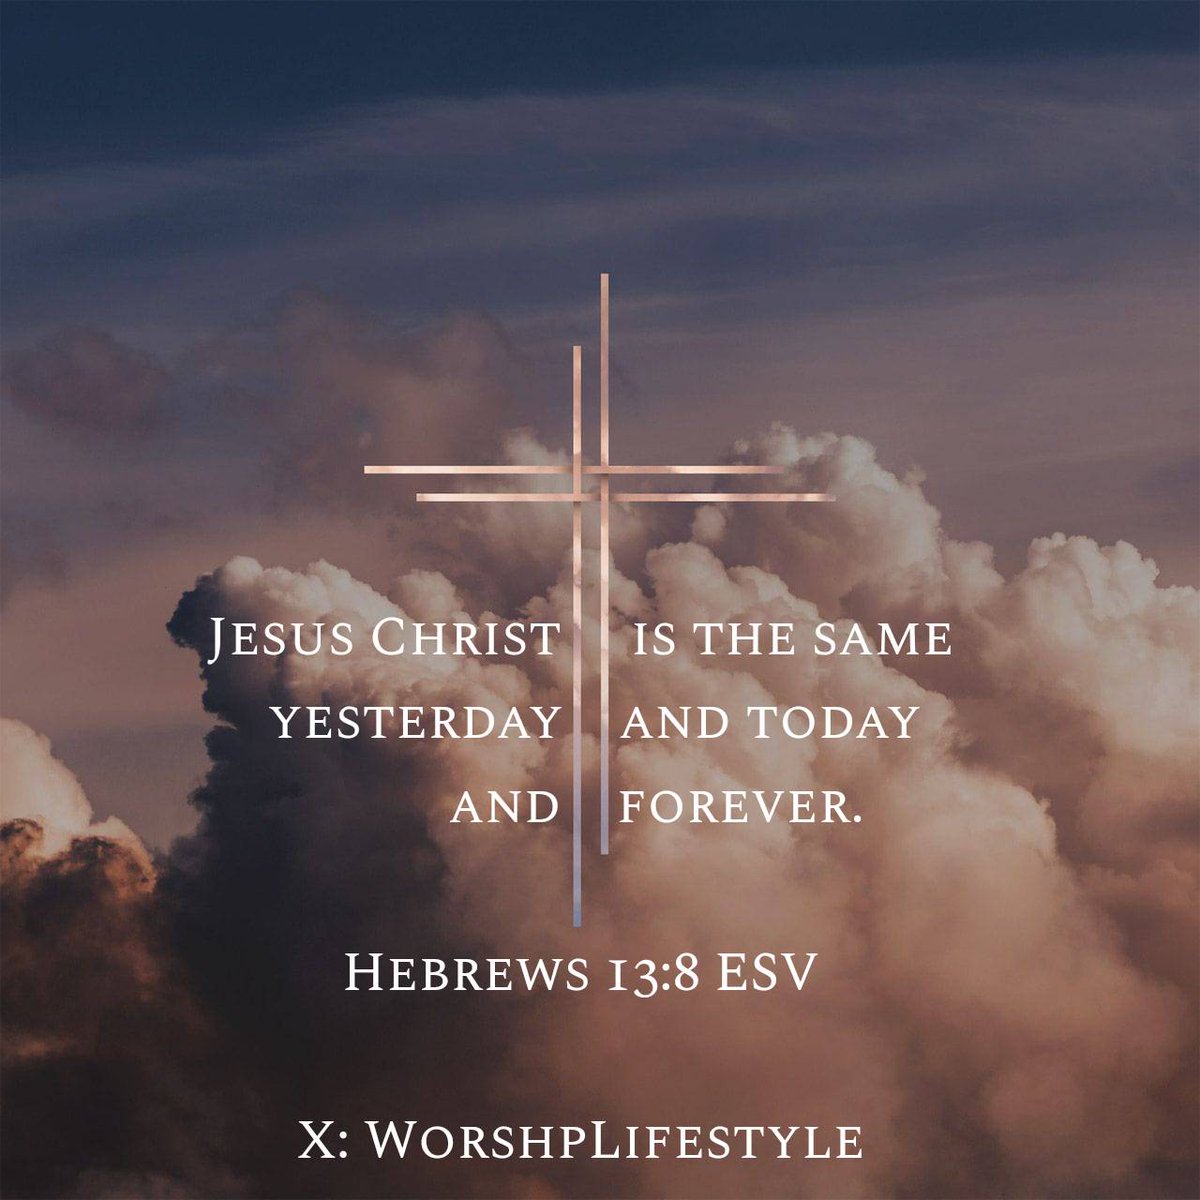 Hebrews 13:8 ESV
Jesus Christ is the same yesterday and today and forever. 

bible.com/bible/59/heb.1…
#VerseOfTheDay #BibleVerse #WorshpLifestyle #WorshipLifestyle